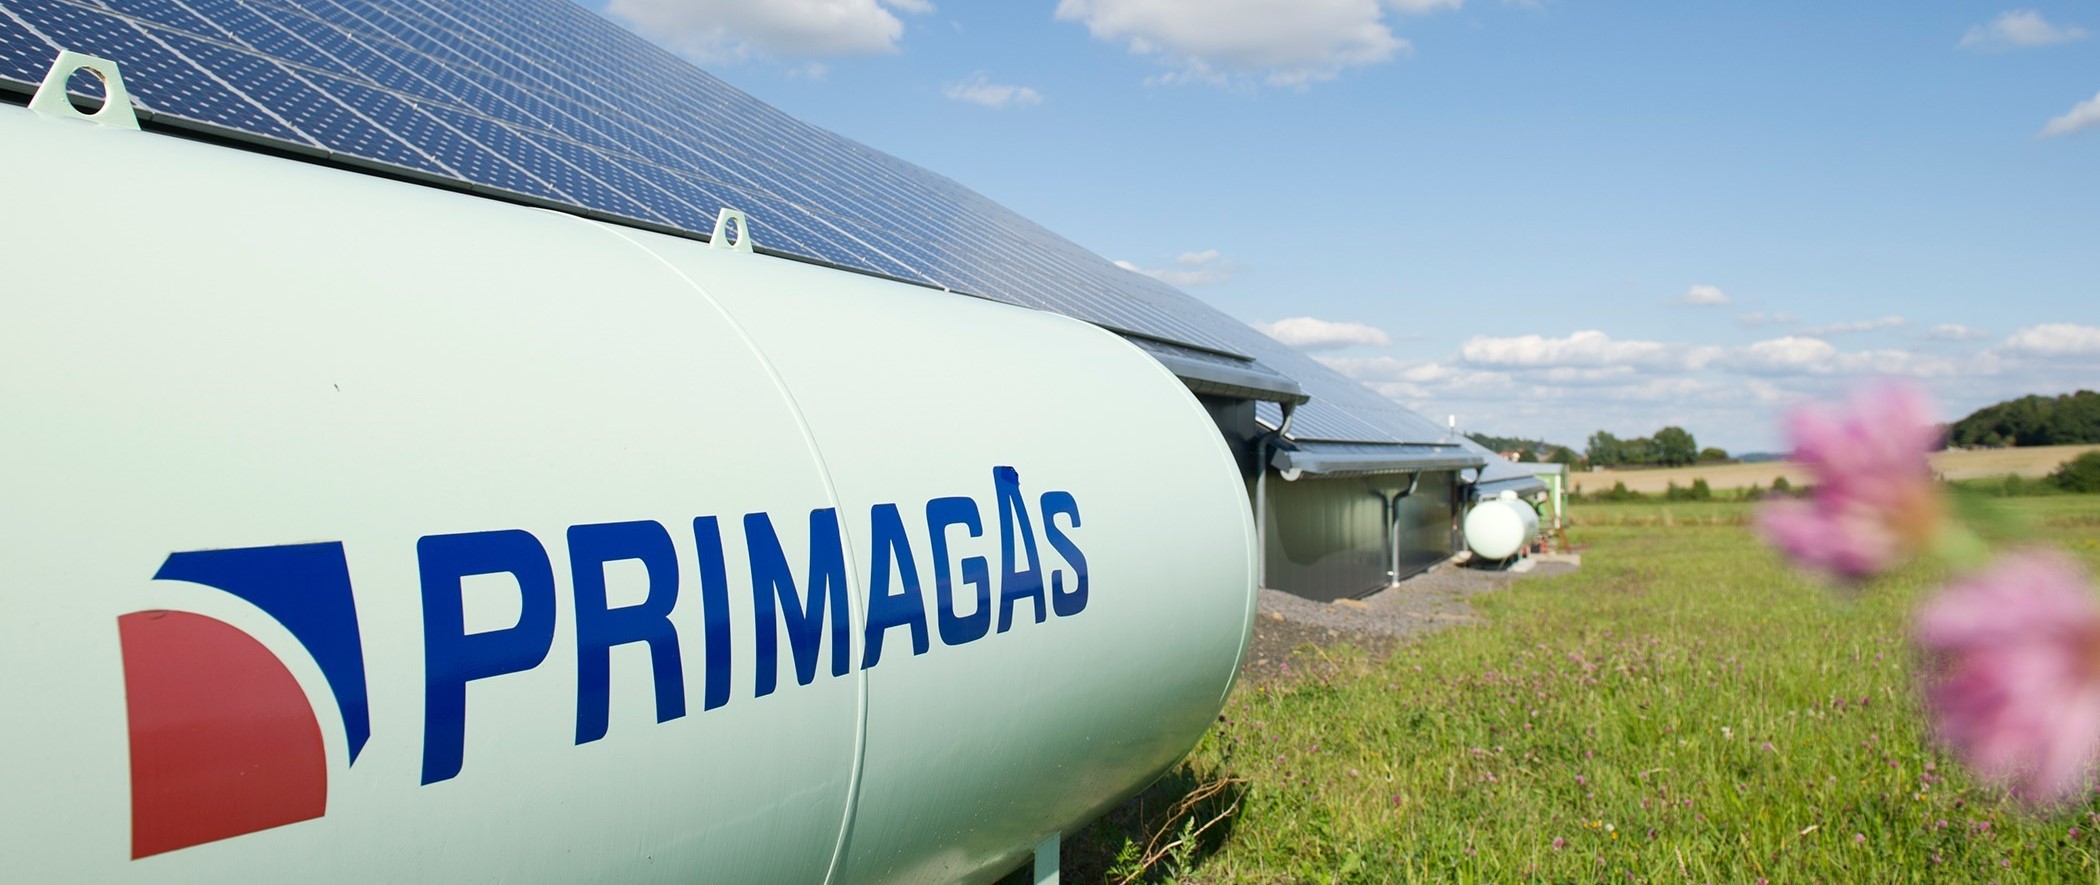 Primagas Germany – expanding our commitment to climate protection